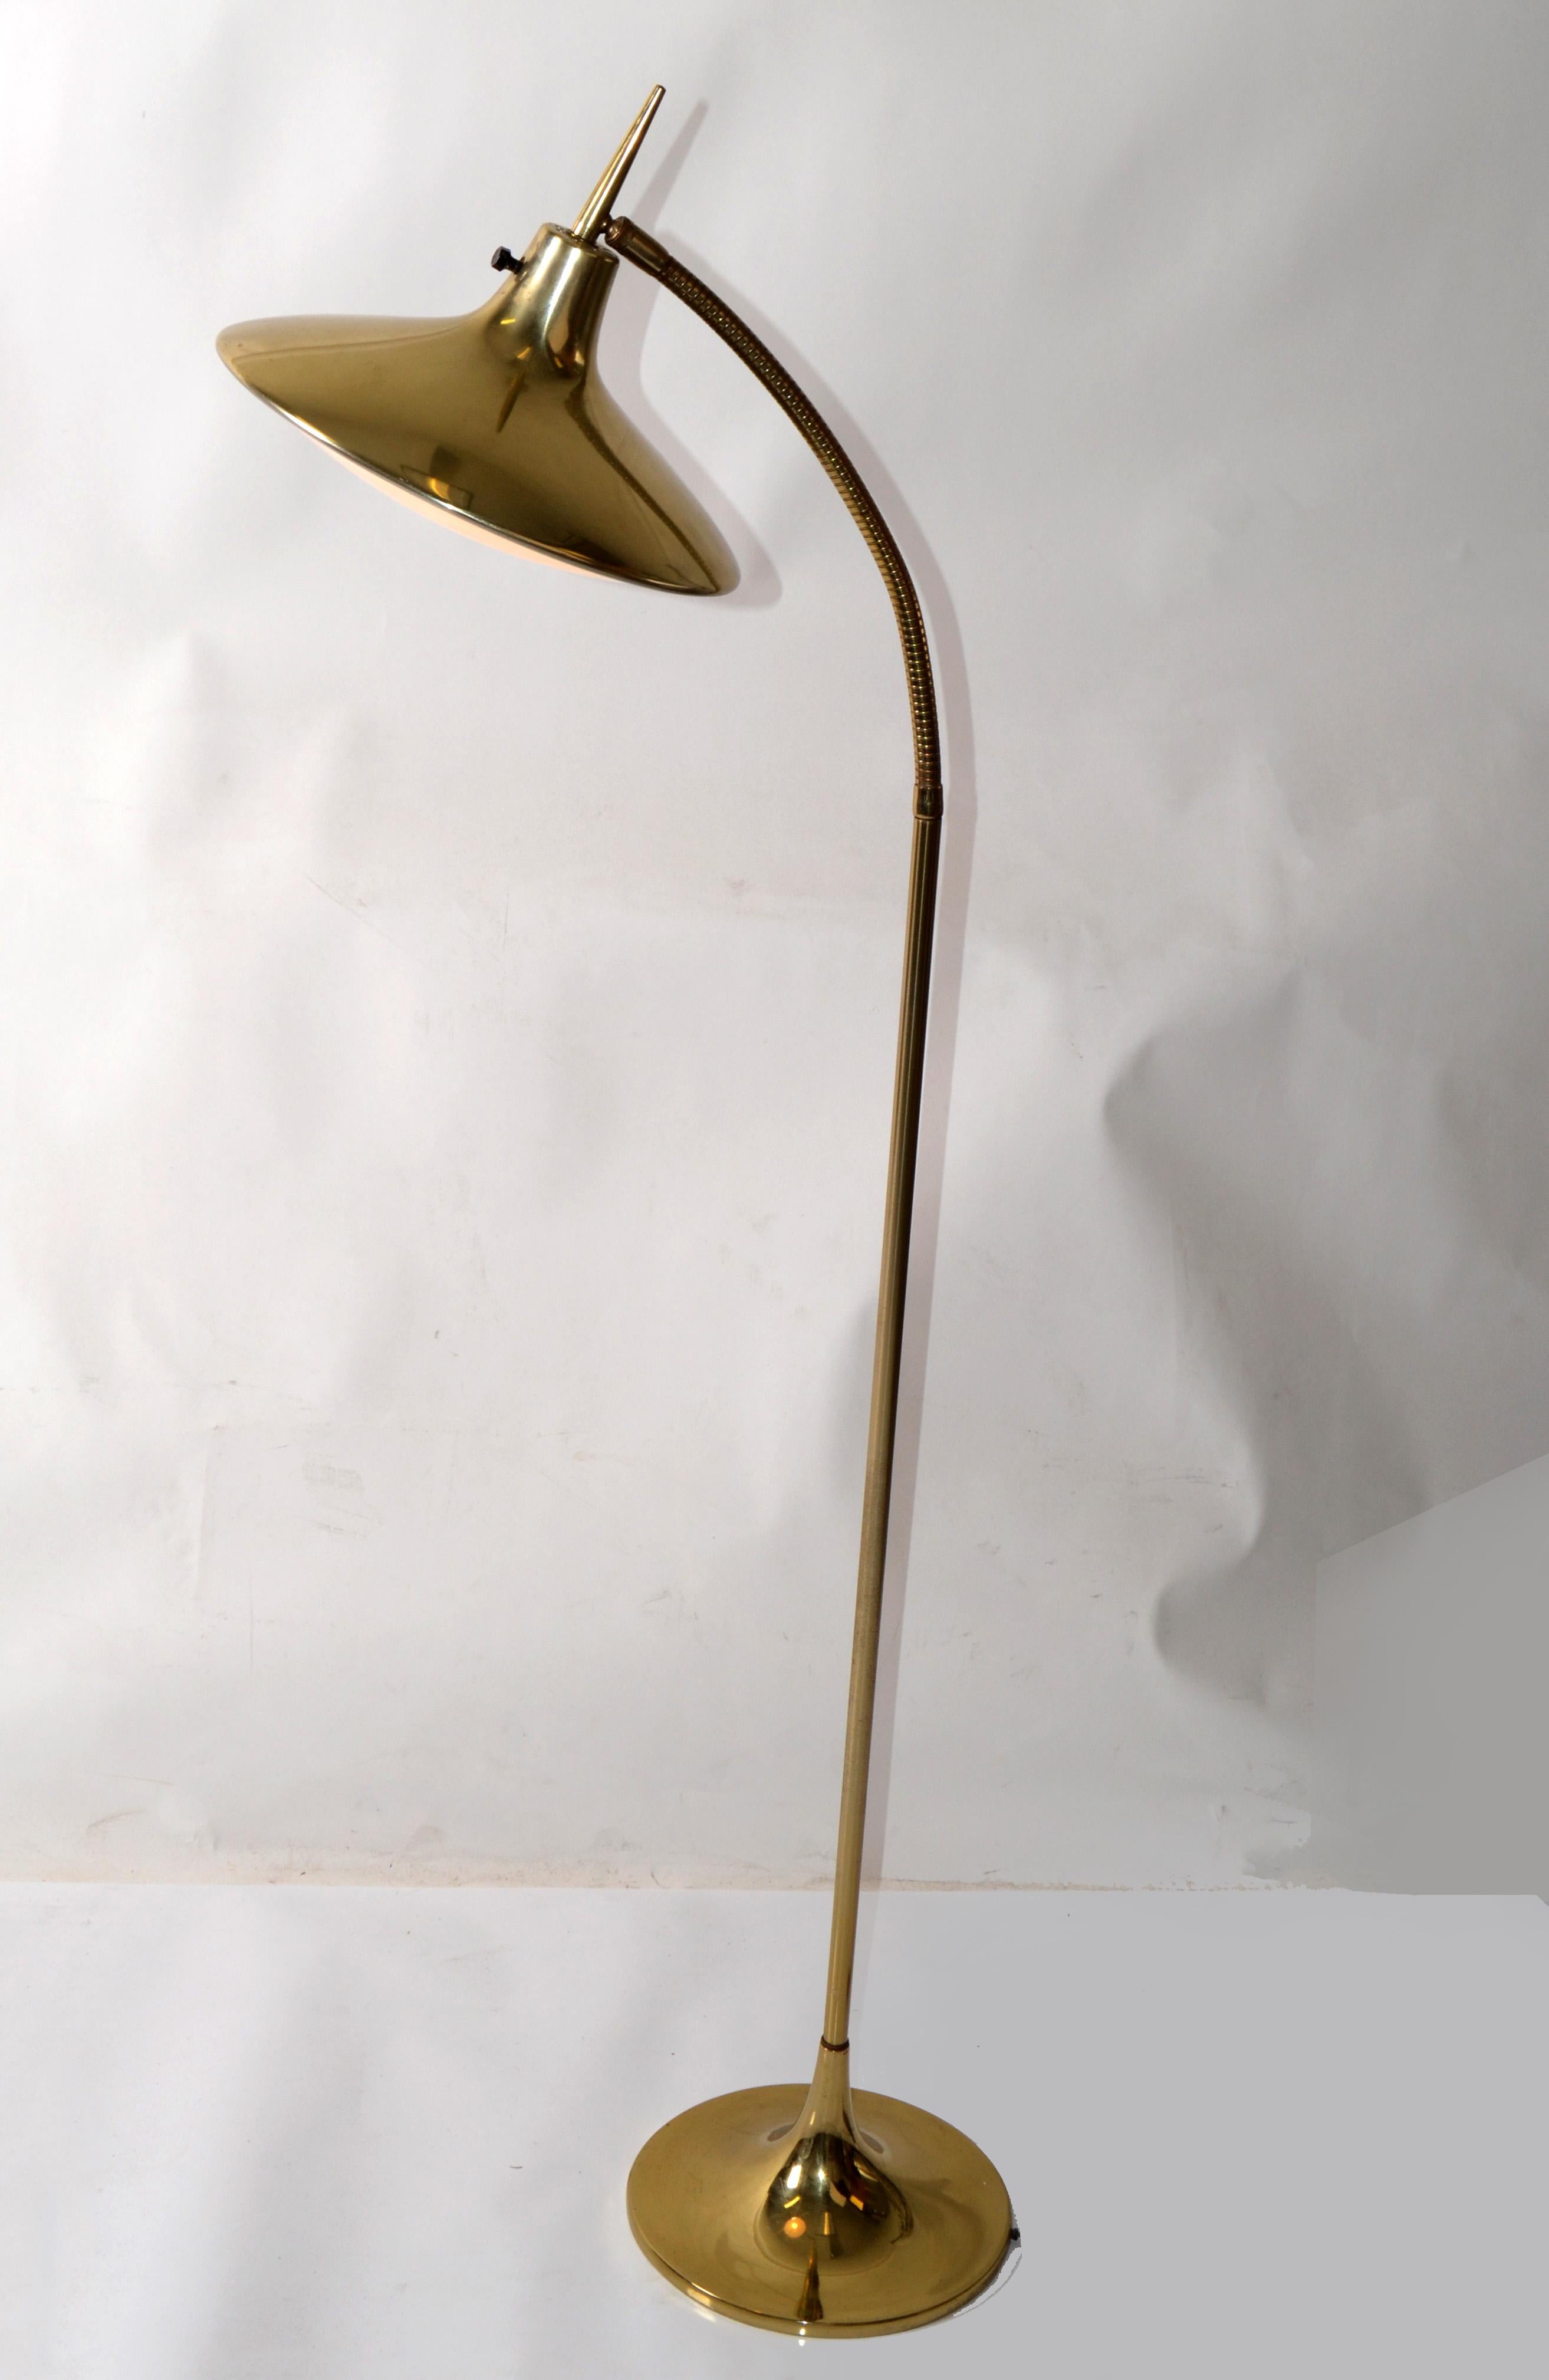 Gio Ponti Style brass adjustable gooseneck floor lamp made by Laurel Lamp Company. 
US Rewiring and takes 1 regular or LED Light.
The plastic diffuser gives a warm relaxing light. 
Makers Mark and numbered underneath the round Base.
Shade